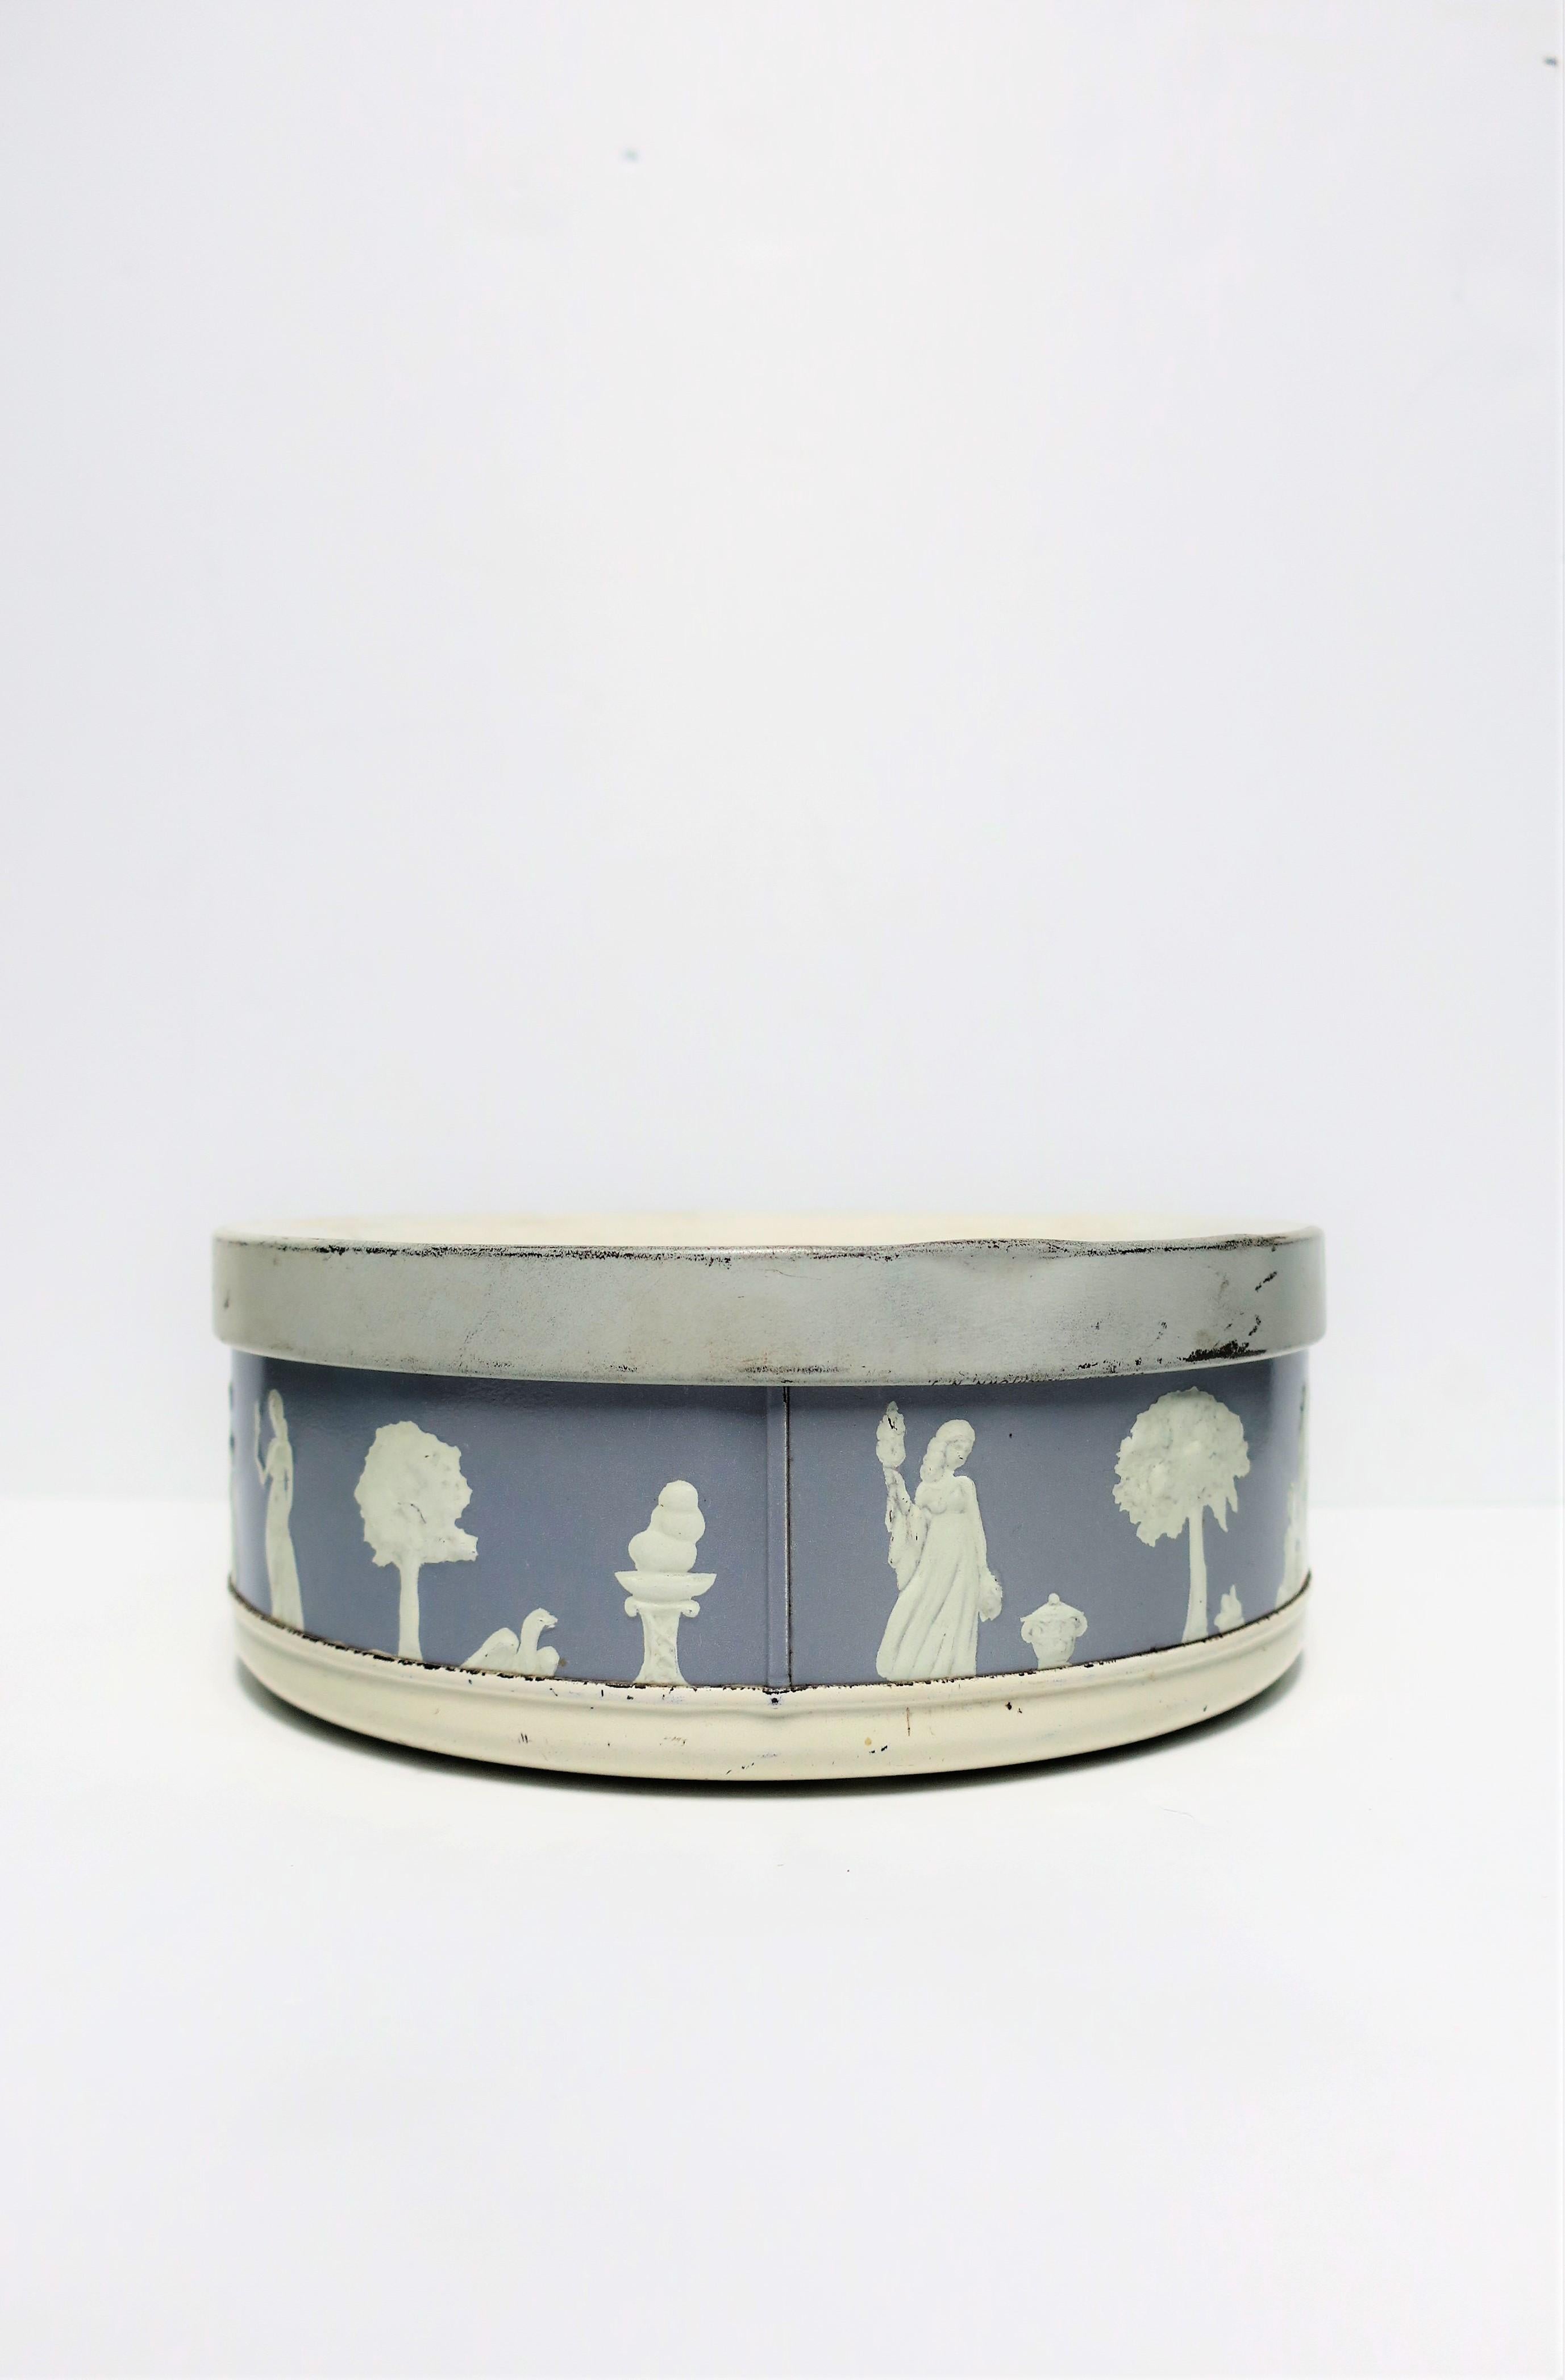 Neoclassical Round Box in the Style of the Wedgwood For Sale 3